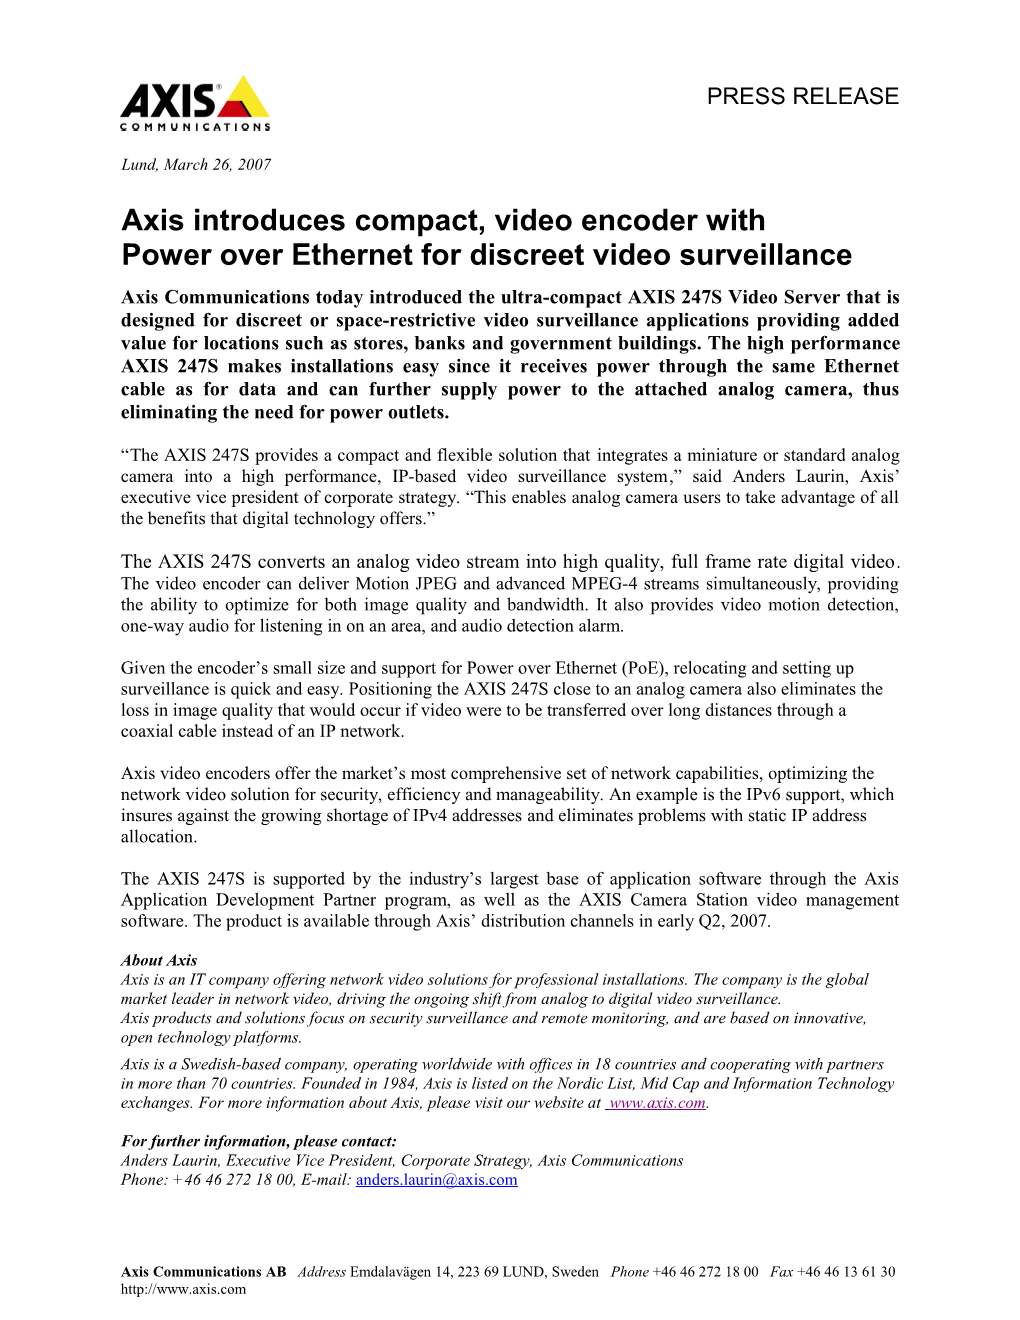 Axis Communications Today Introduced the Ultra-Compact AXIS 247S Video Server That Is